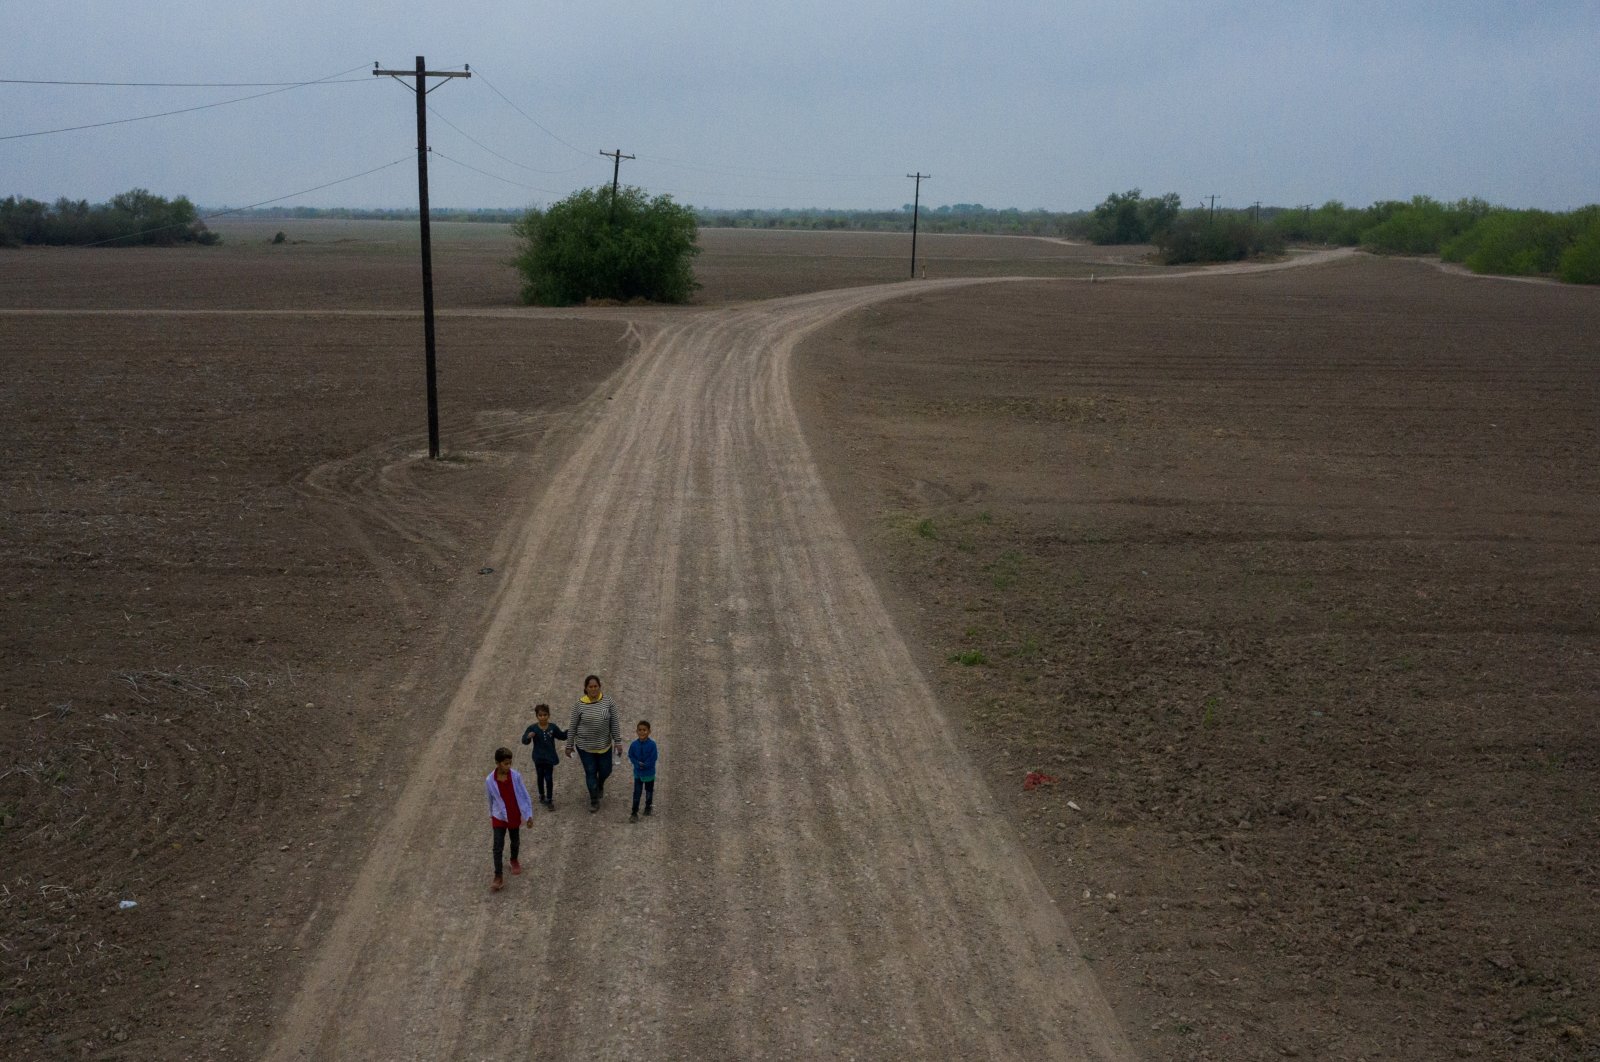 Sonia, an asylum-seeking migrant from Honduras, walks down a dirt road with her three children Jefferson, 9, Scarlet, 7, and David, 6, after they crossed the Rio Grande river into the United States from Mexico on a raft in Penitas, Texas, U.S., March 16, 2021. (Reuters Photo) 